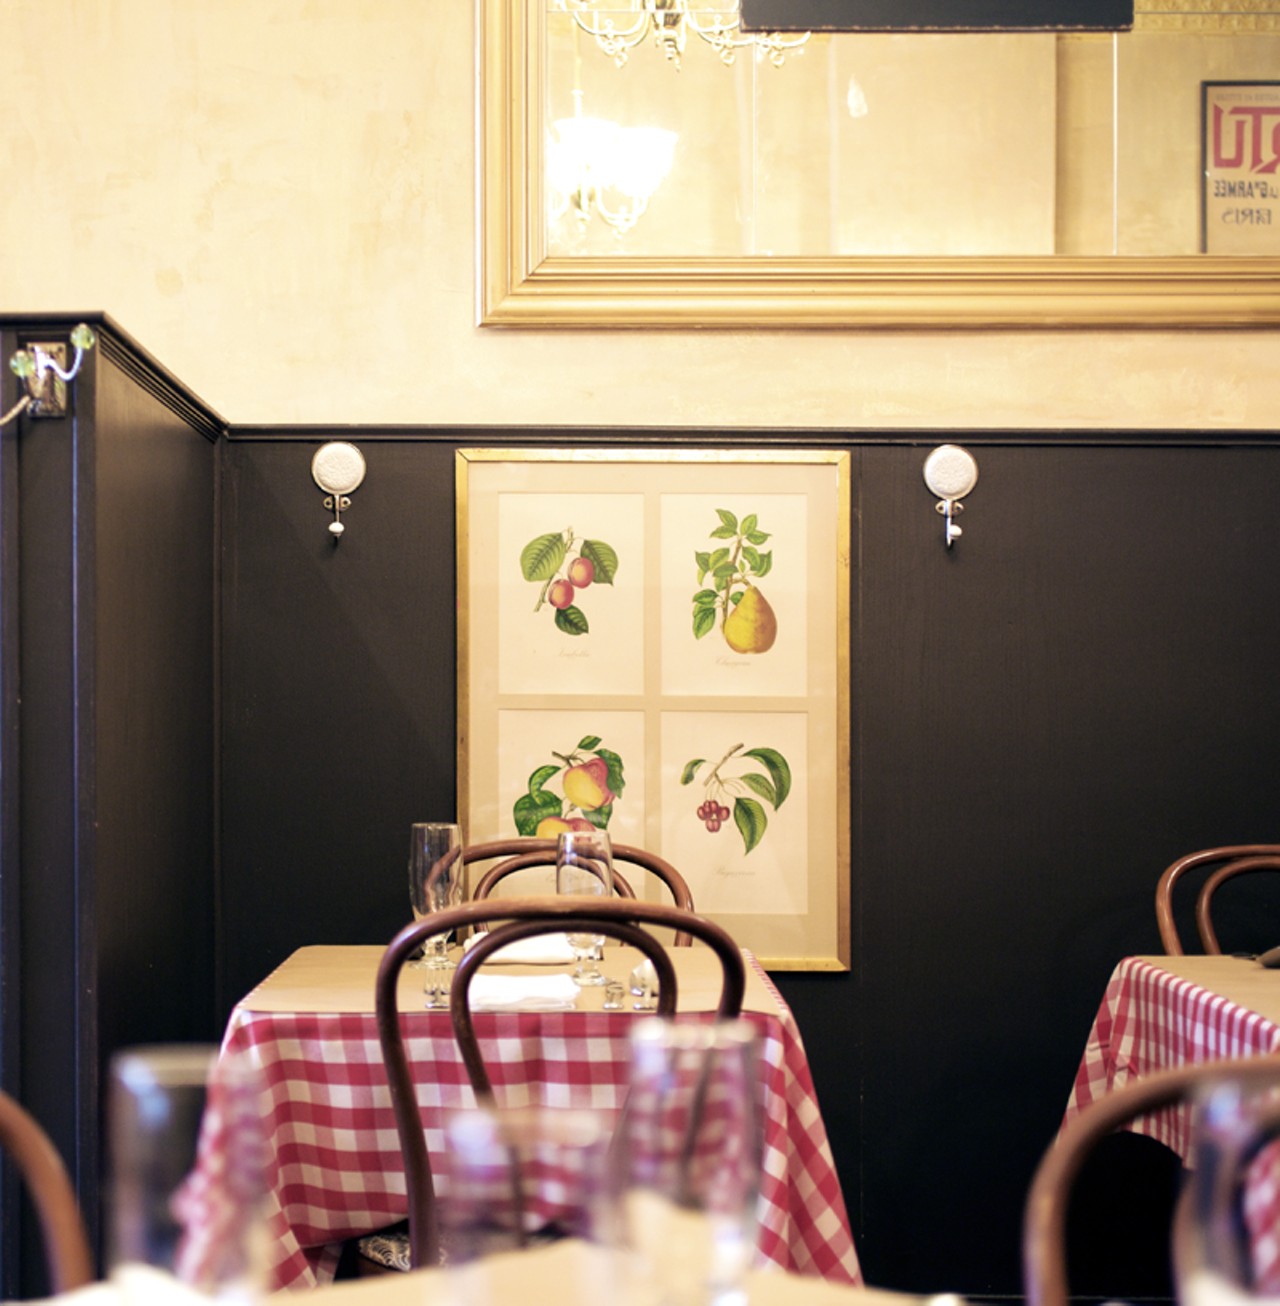 The red-and-white checkered table cloths, topped with brown butcher paper, and whimsical artwork make up the interior of Brasserie by Niche.